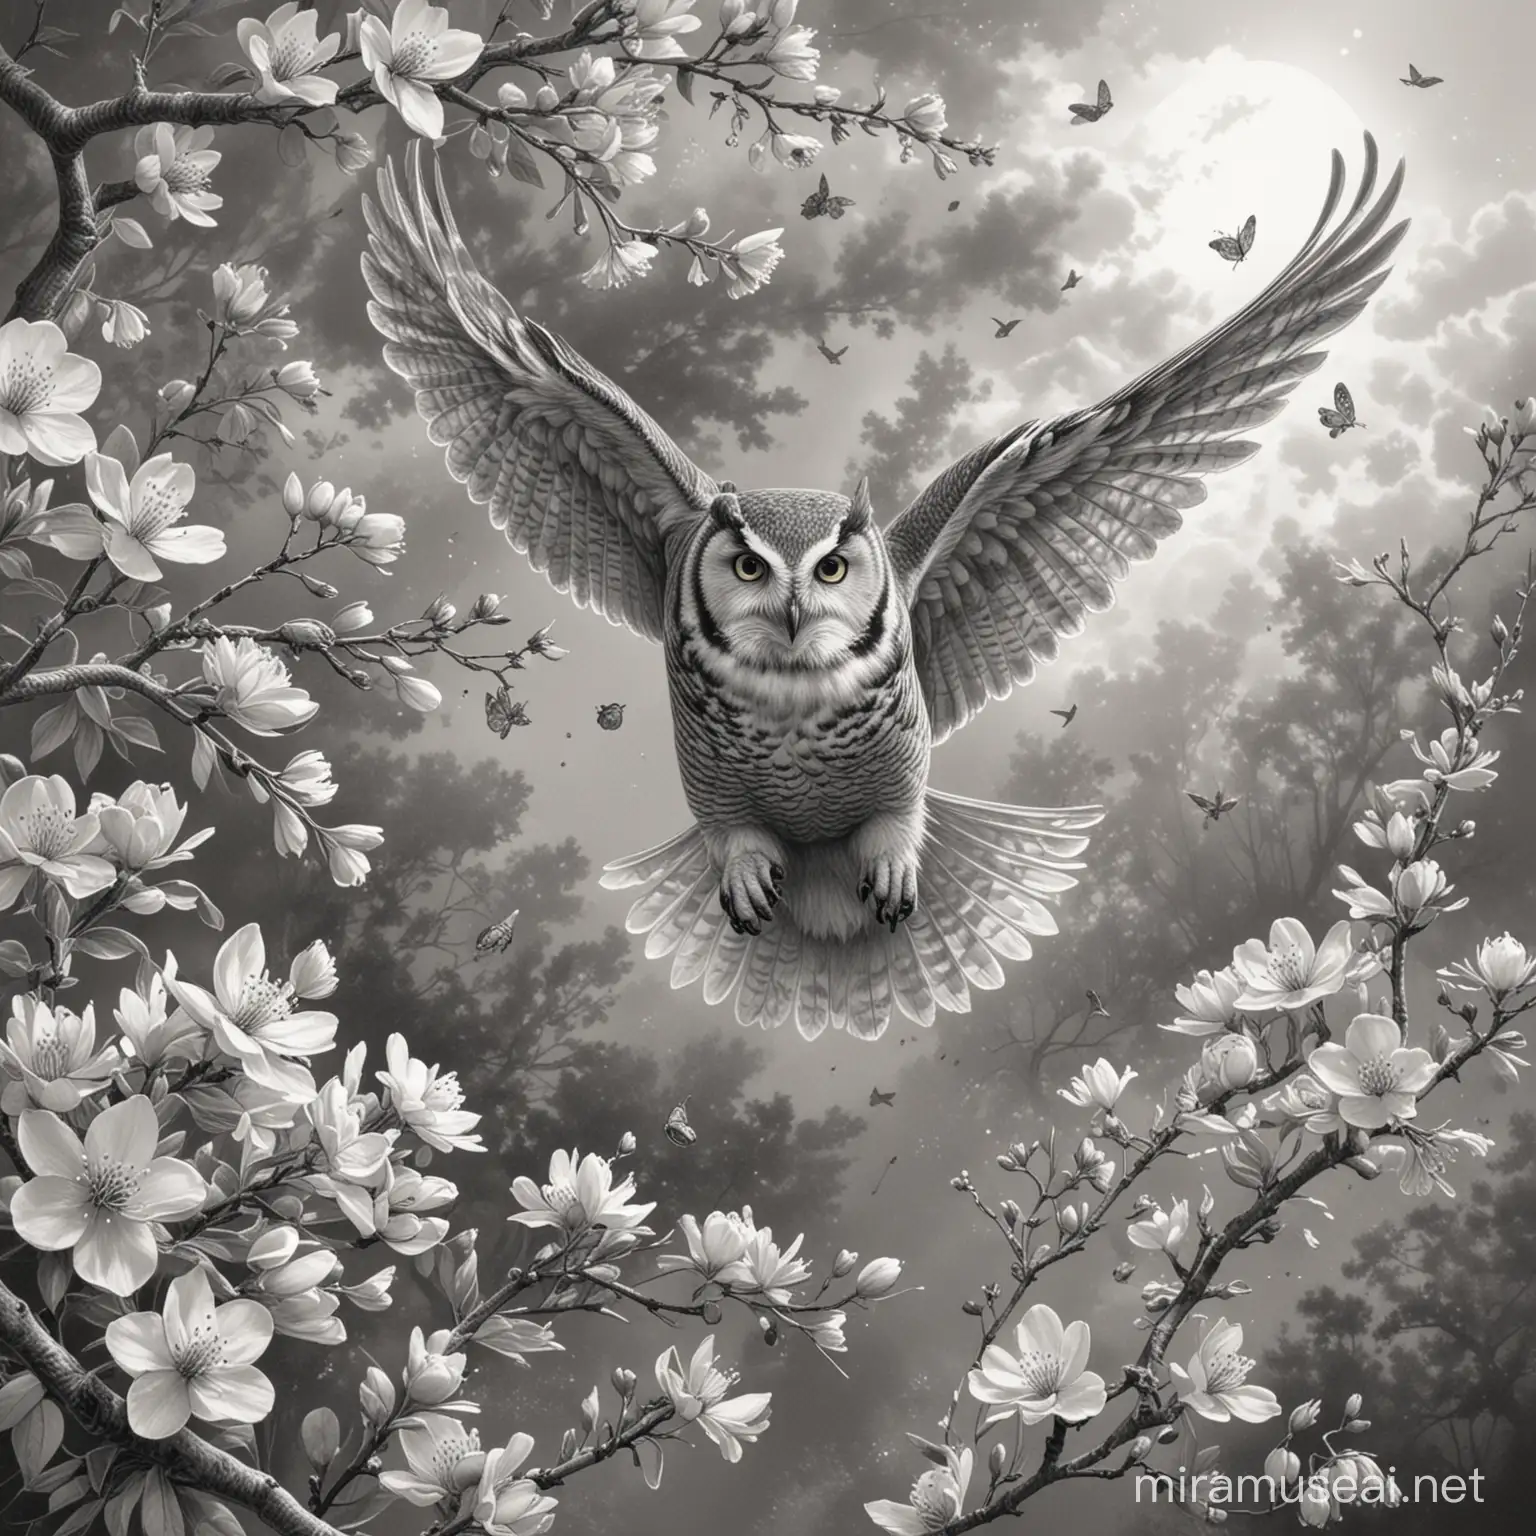 Monochrome Sketch of Owl Soaring over Apple Blossom with Dripping Honey